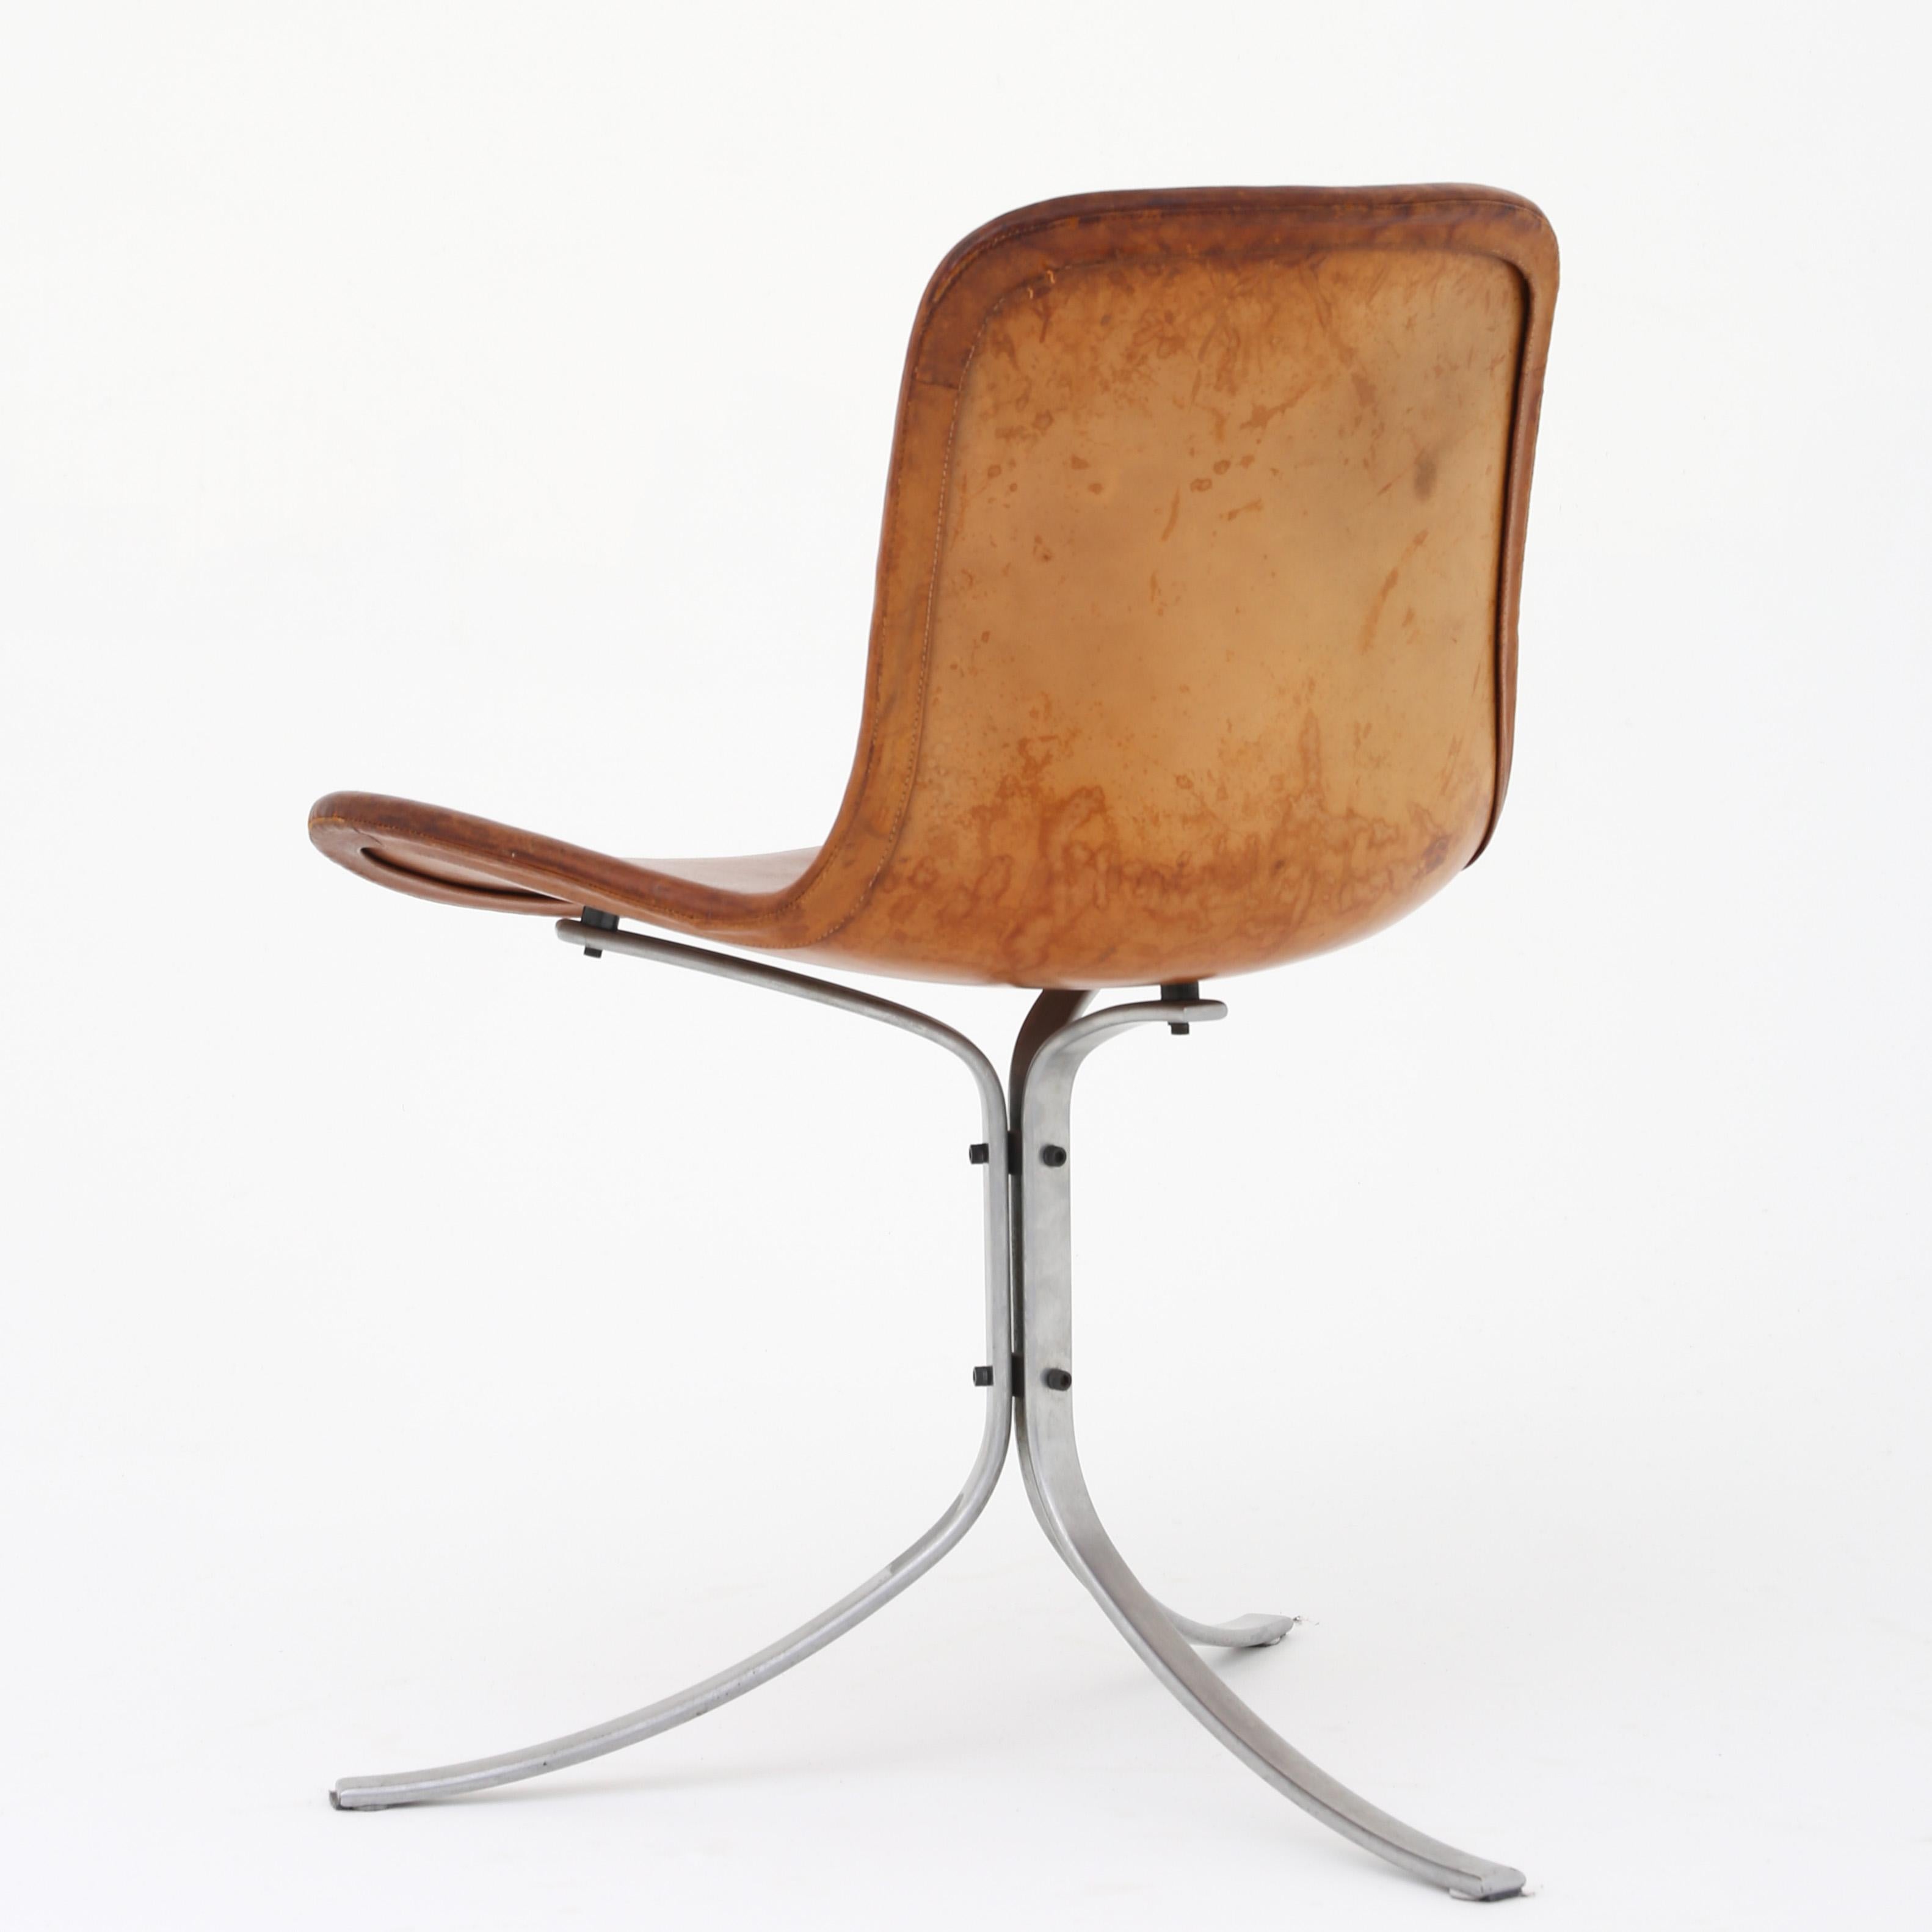 Poul Kjærholm PK 9 - 'Tulip' chair in patinated natural leather with steel frame. E. Kold Christensen.